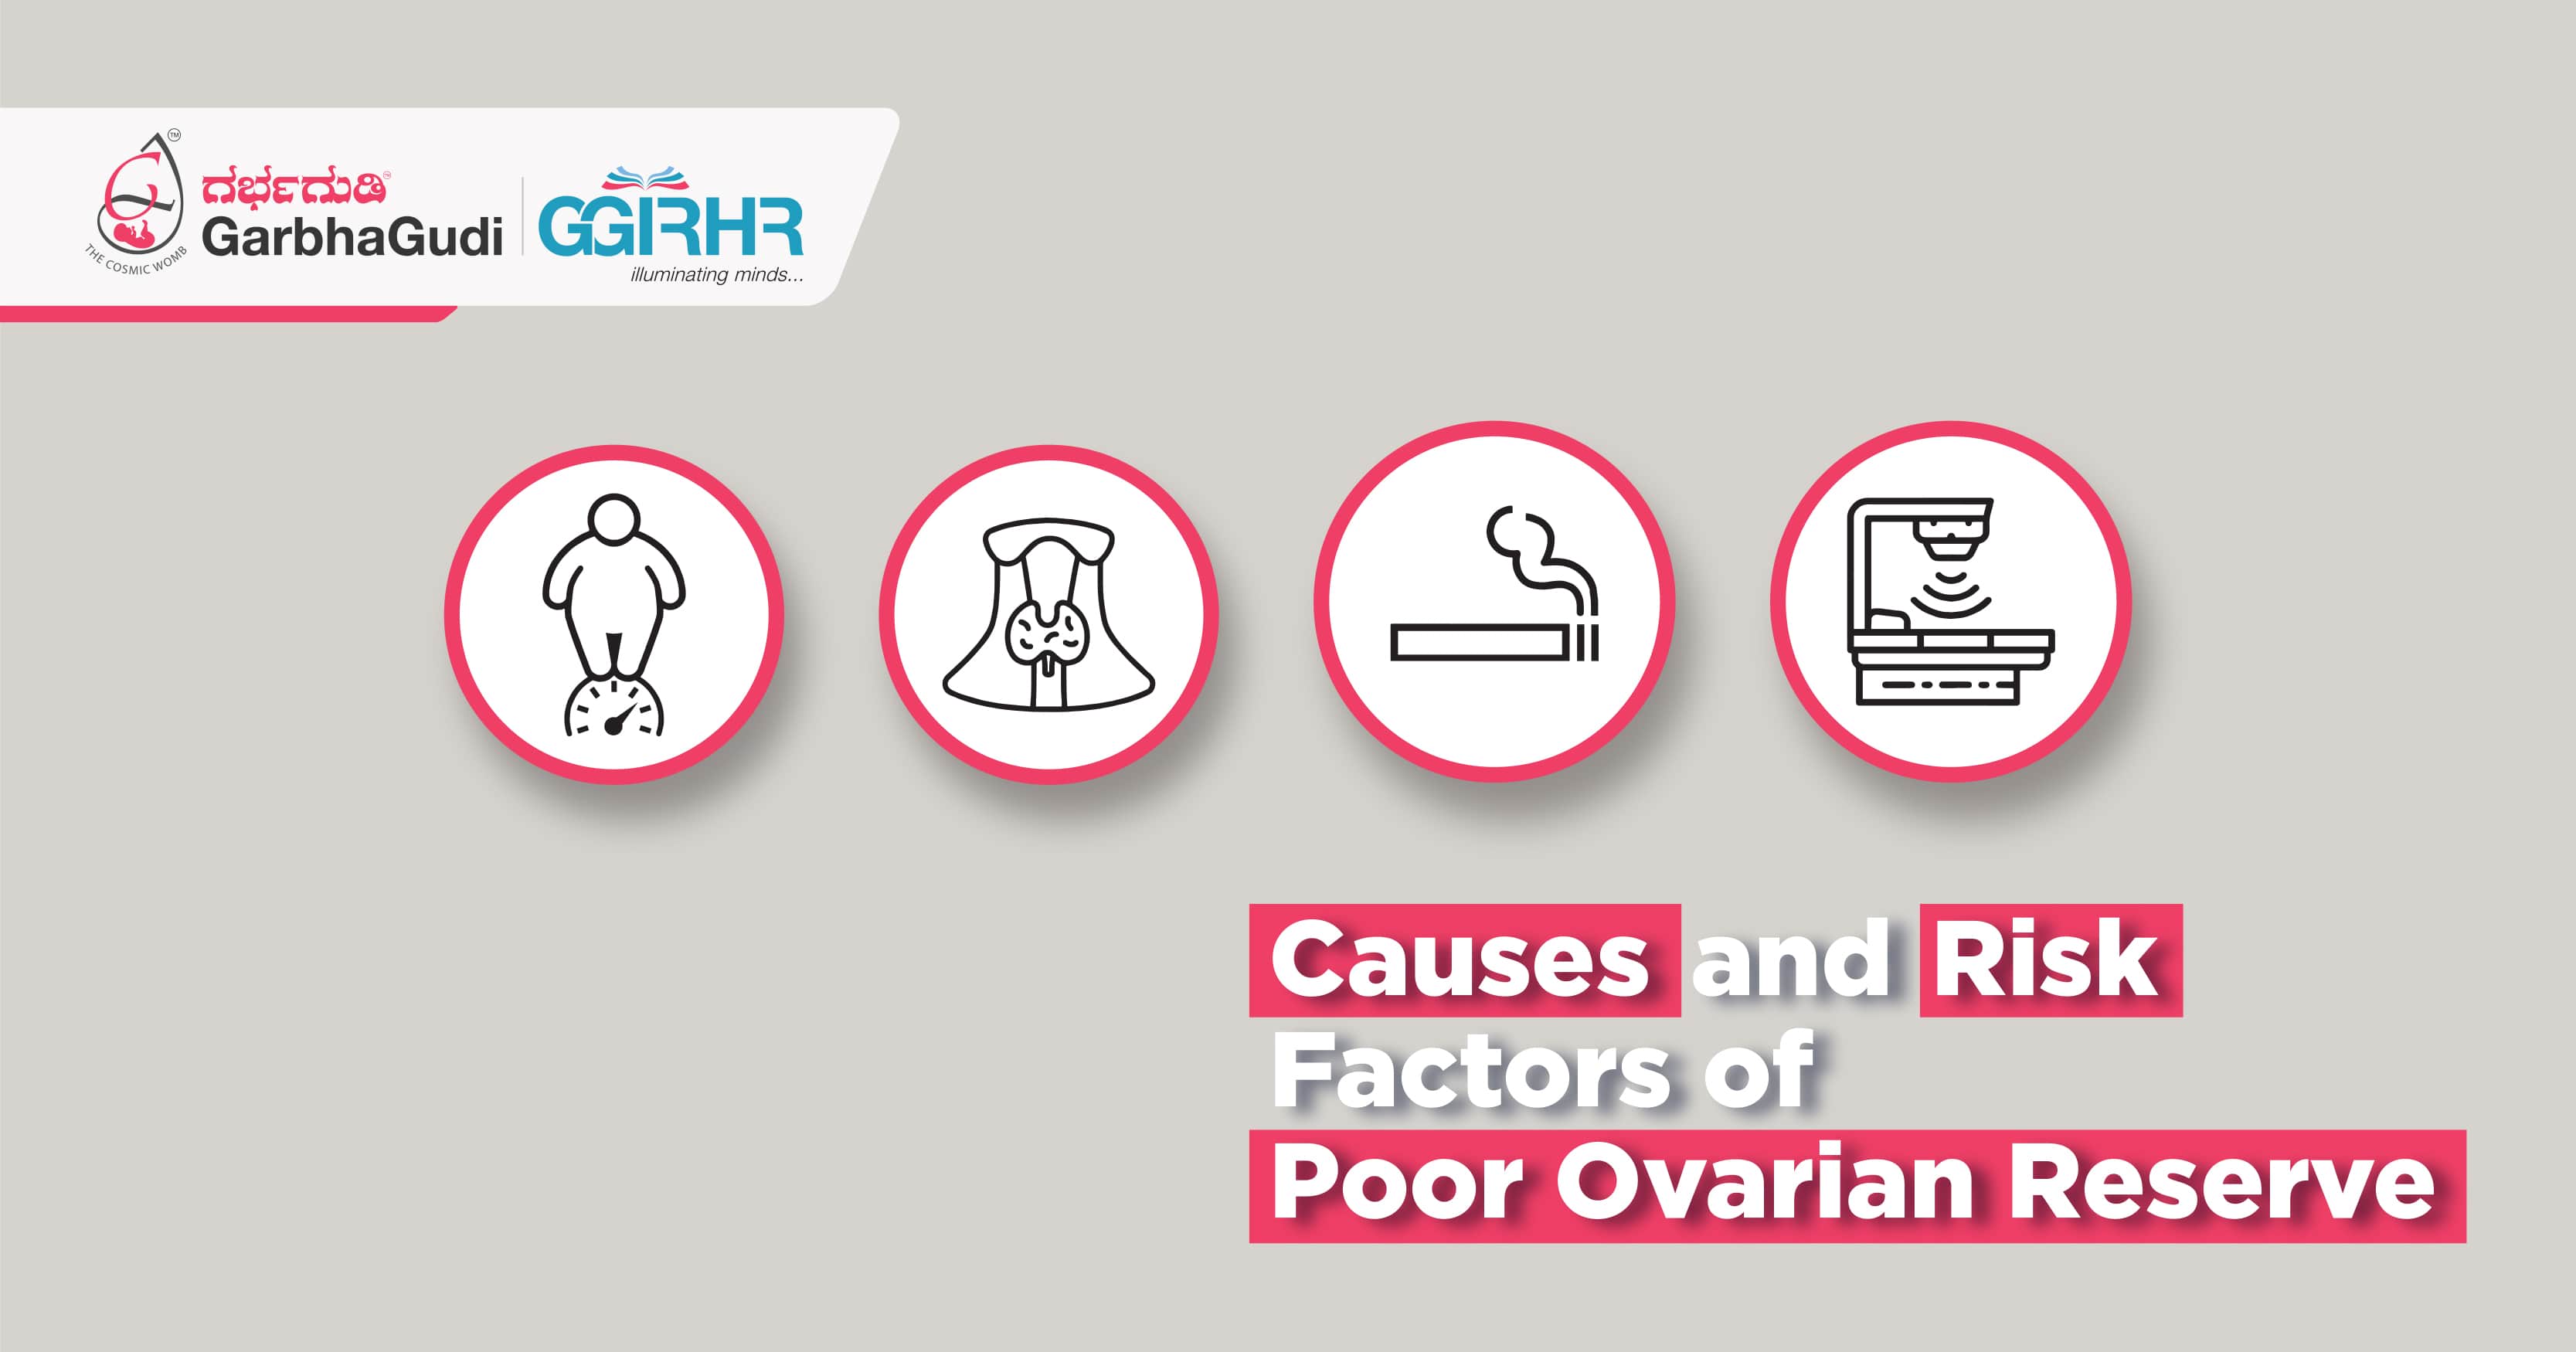 Causes and Risk Factors of Poor Ovarian Reserve